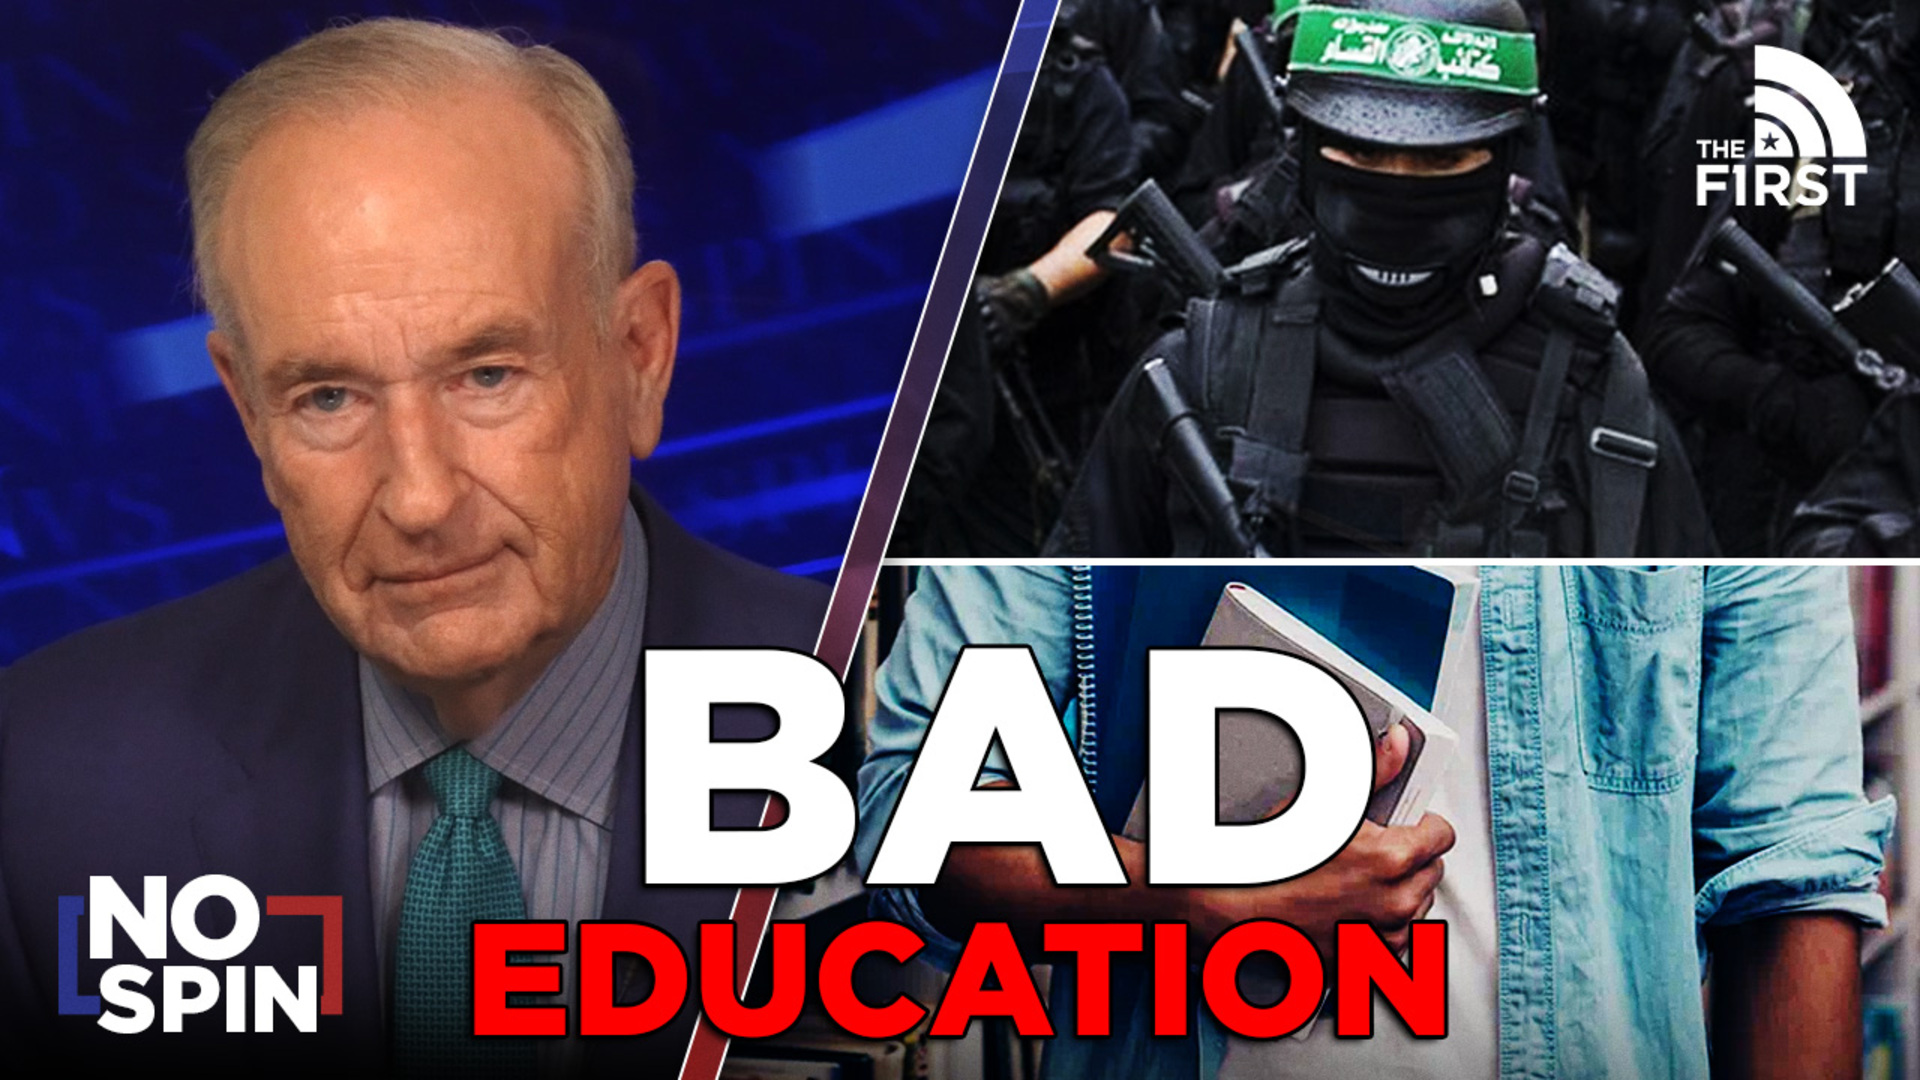 Bill O’Reilly’s Message to Young Progressives